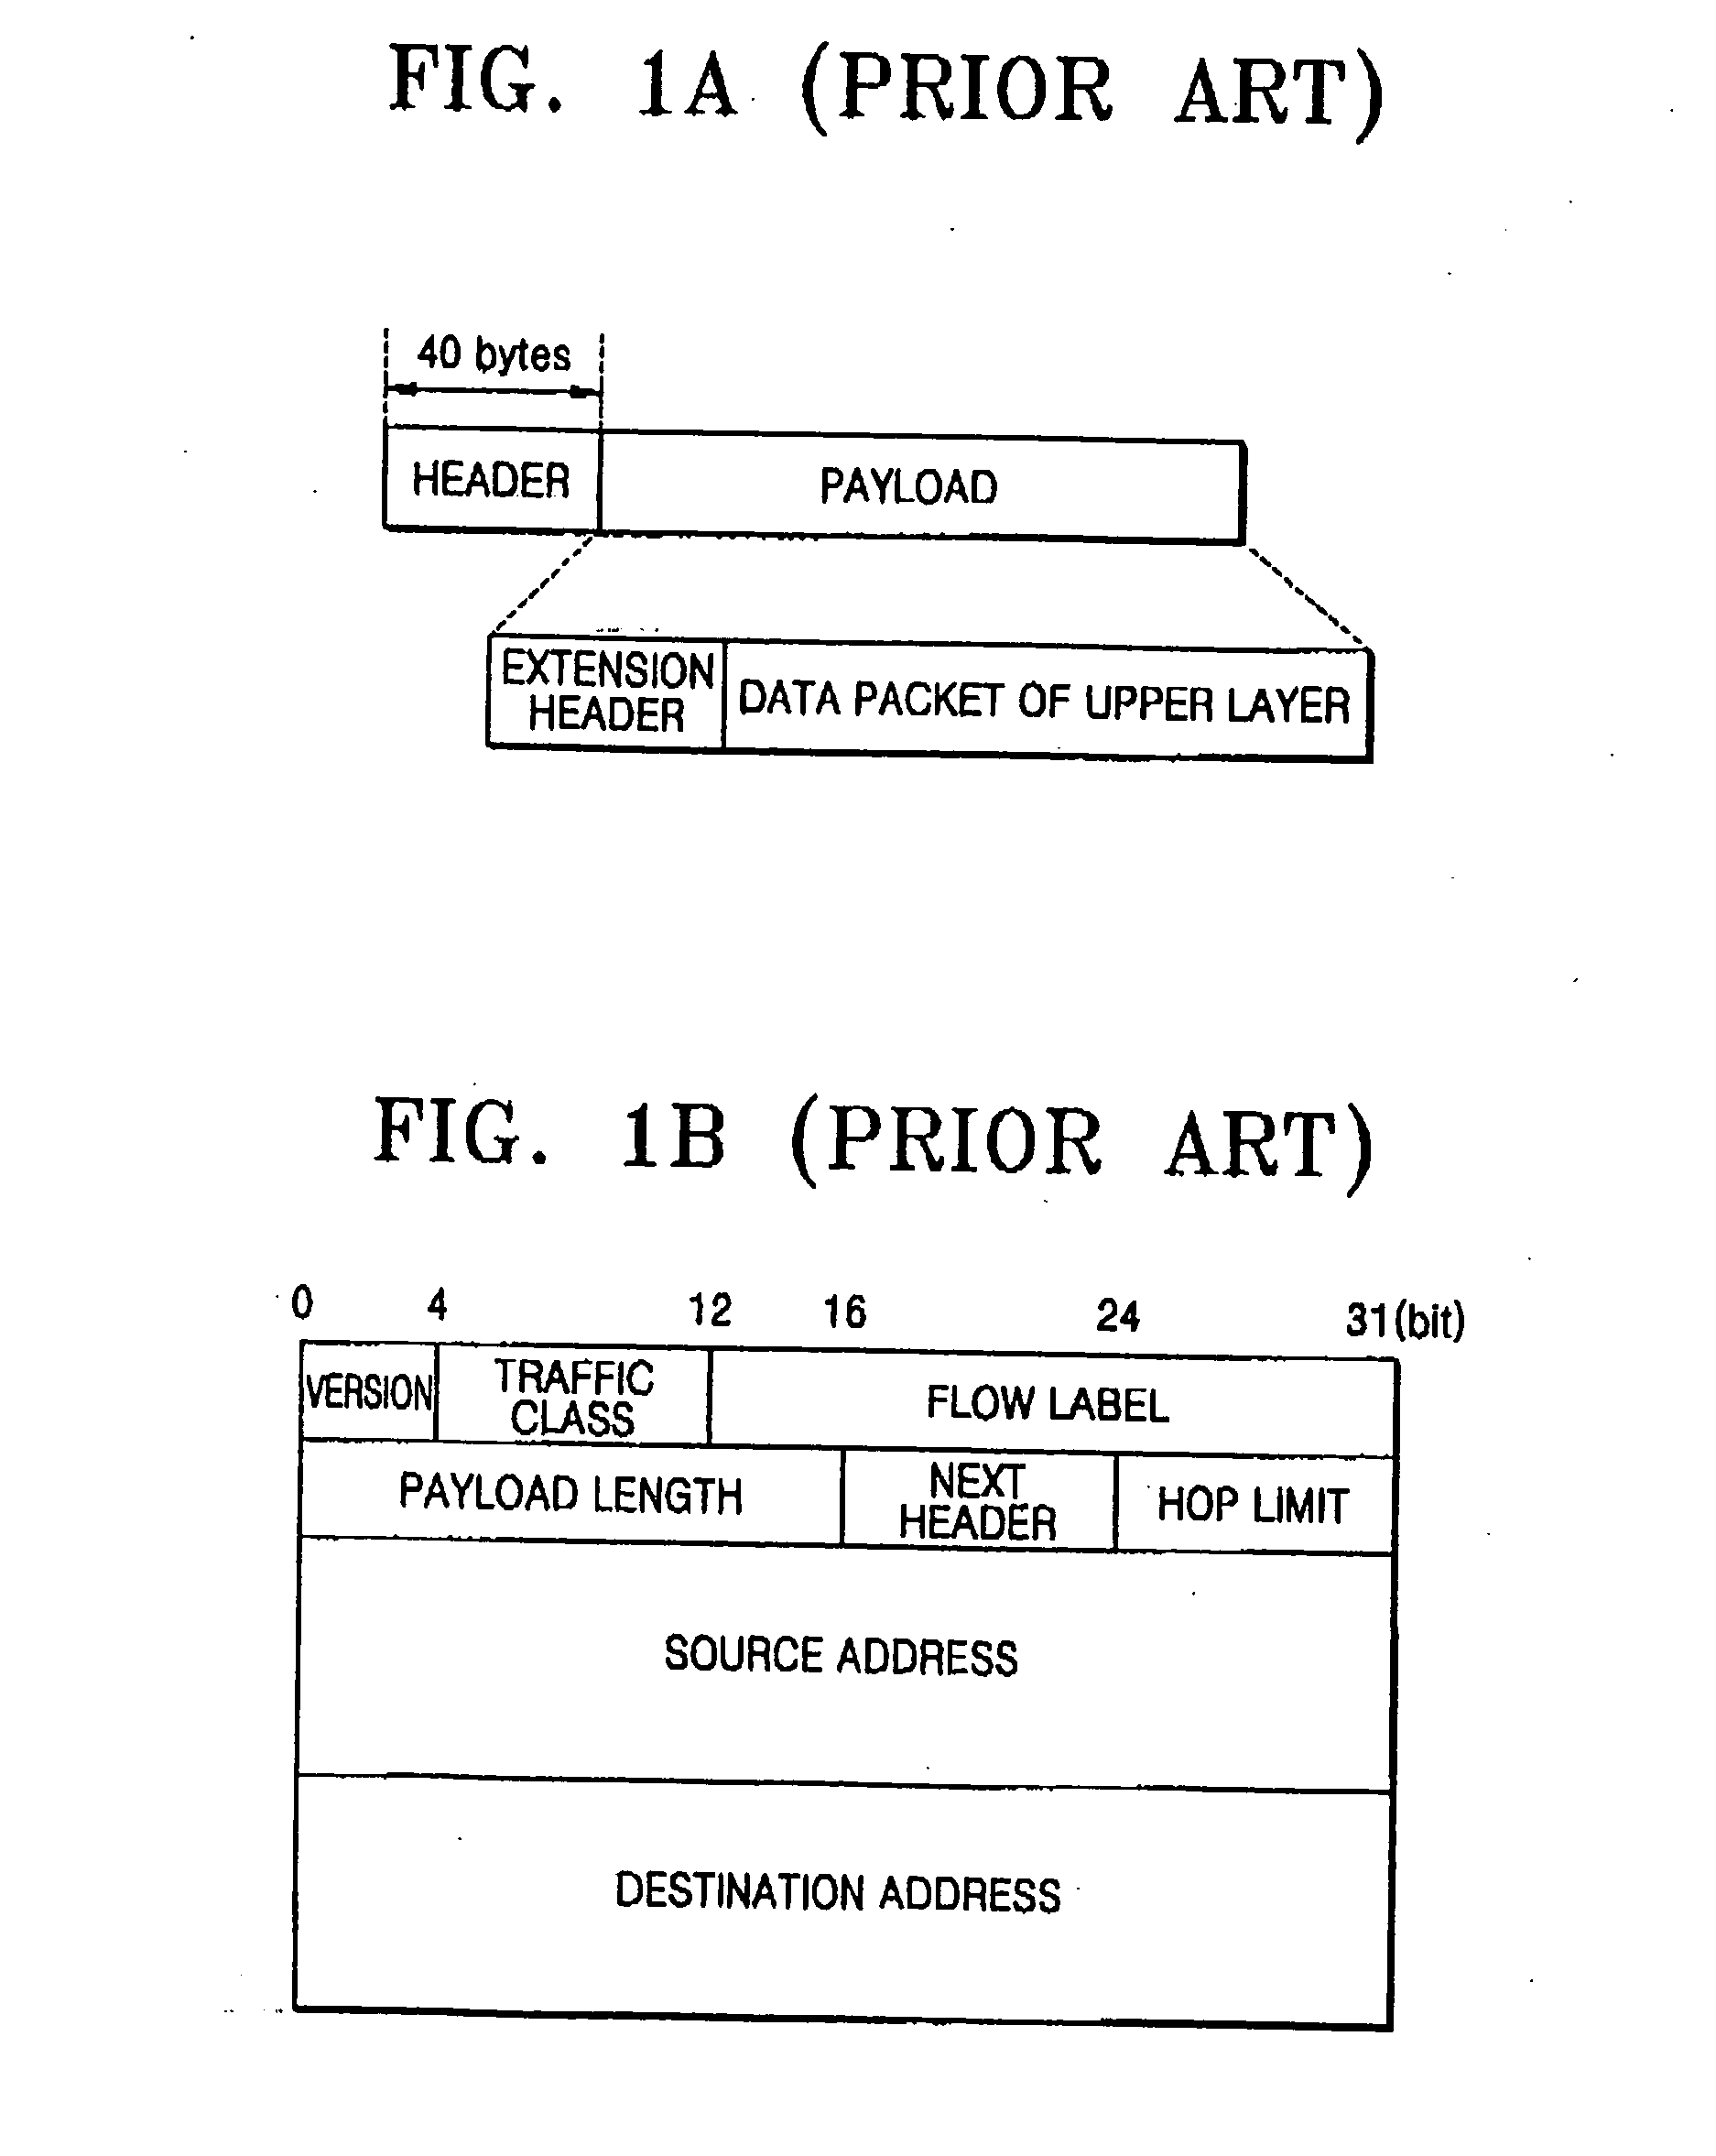 IP packet error handling apparatus and method using the same, and computer readable medium having computer program for executing the method recorded thereon